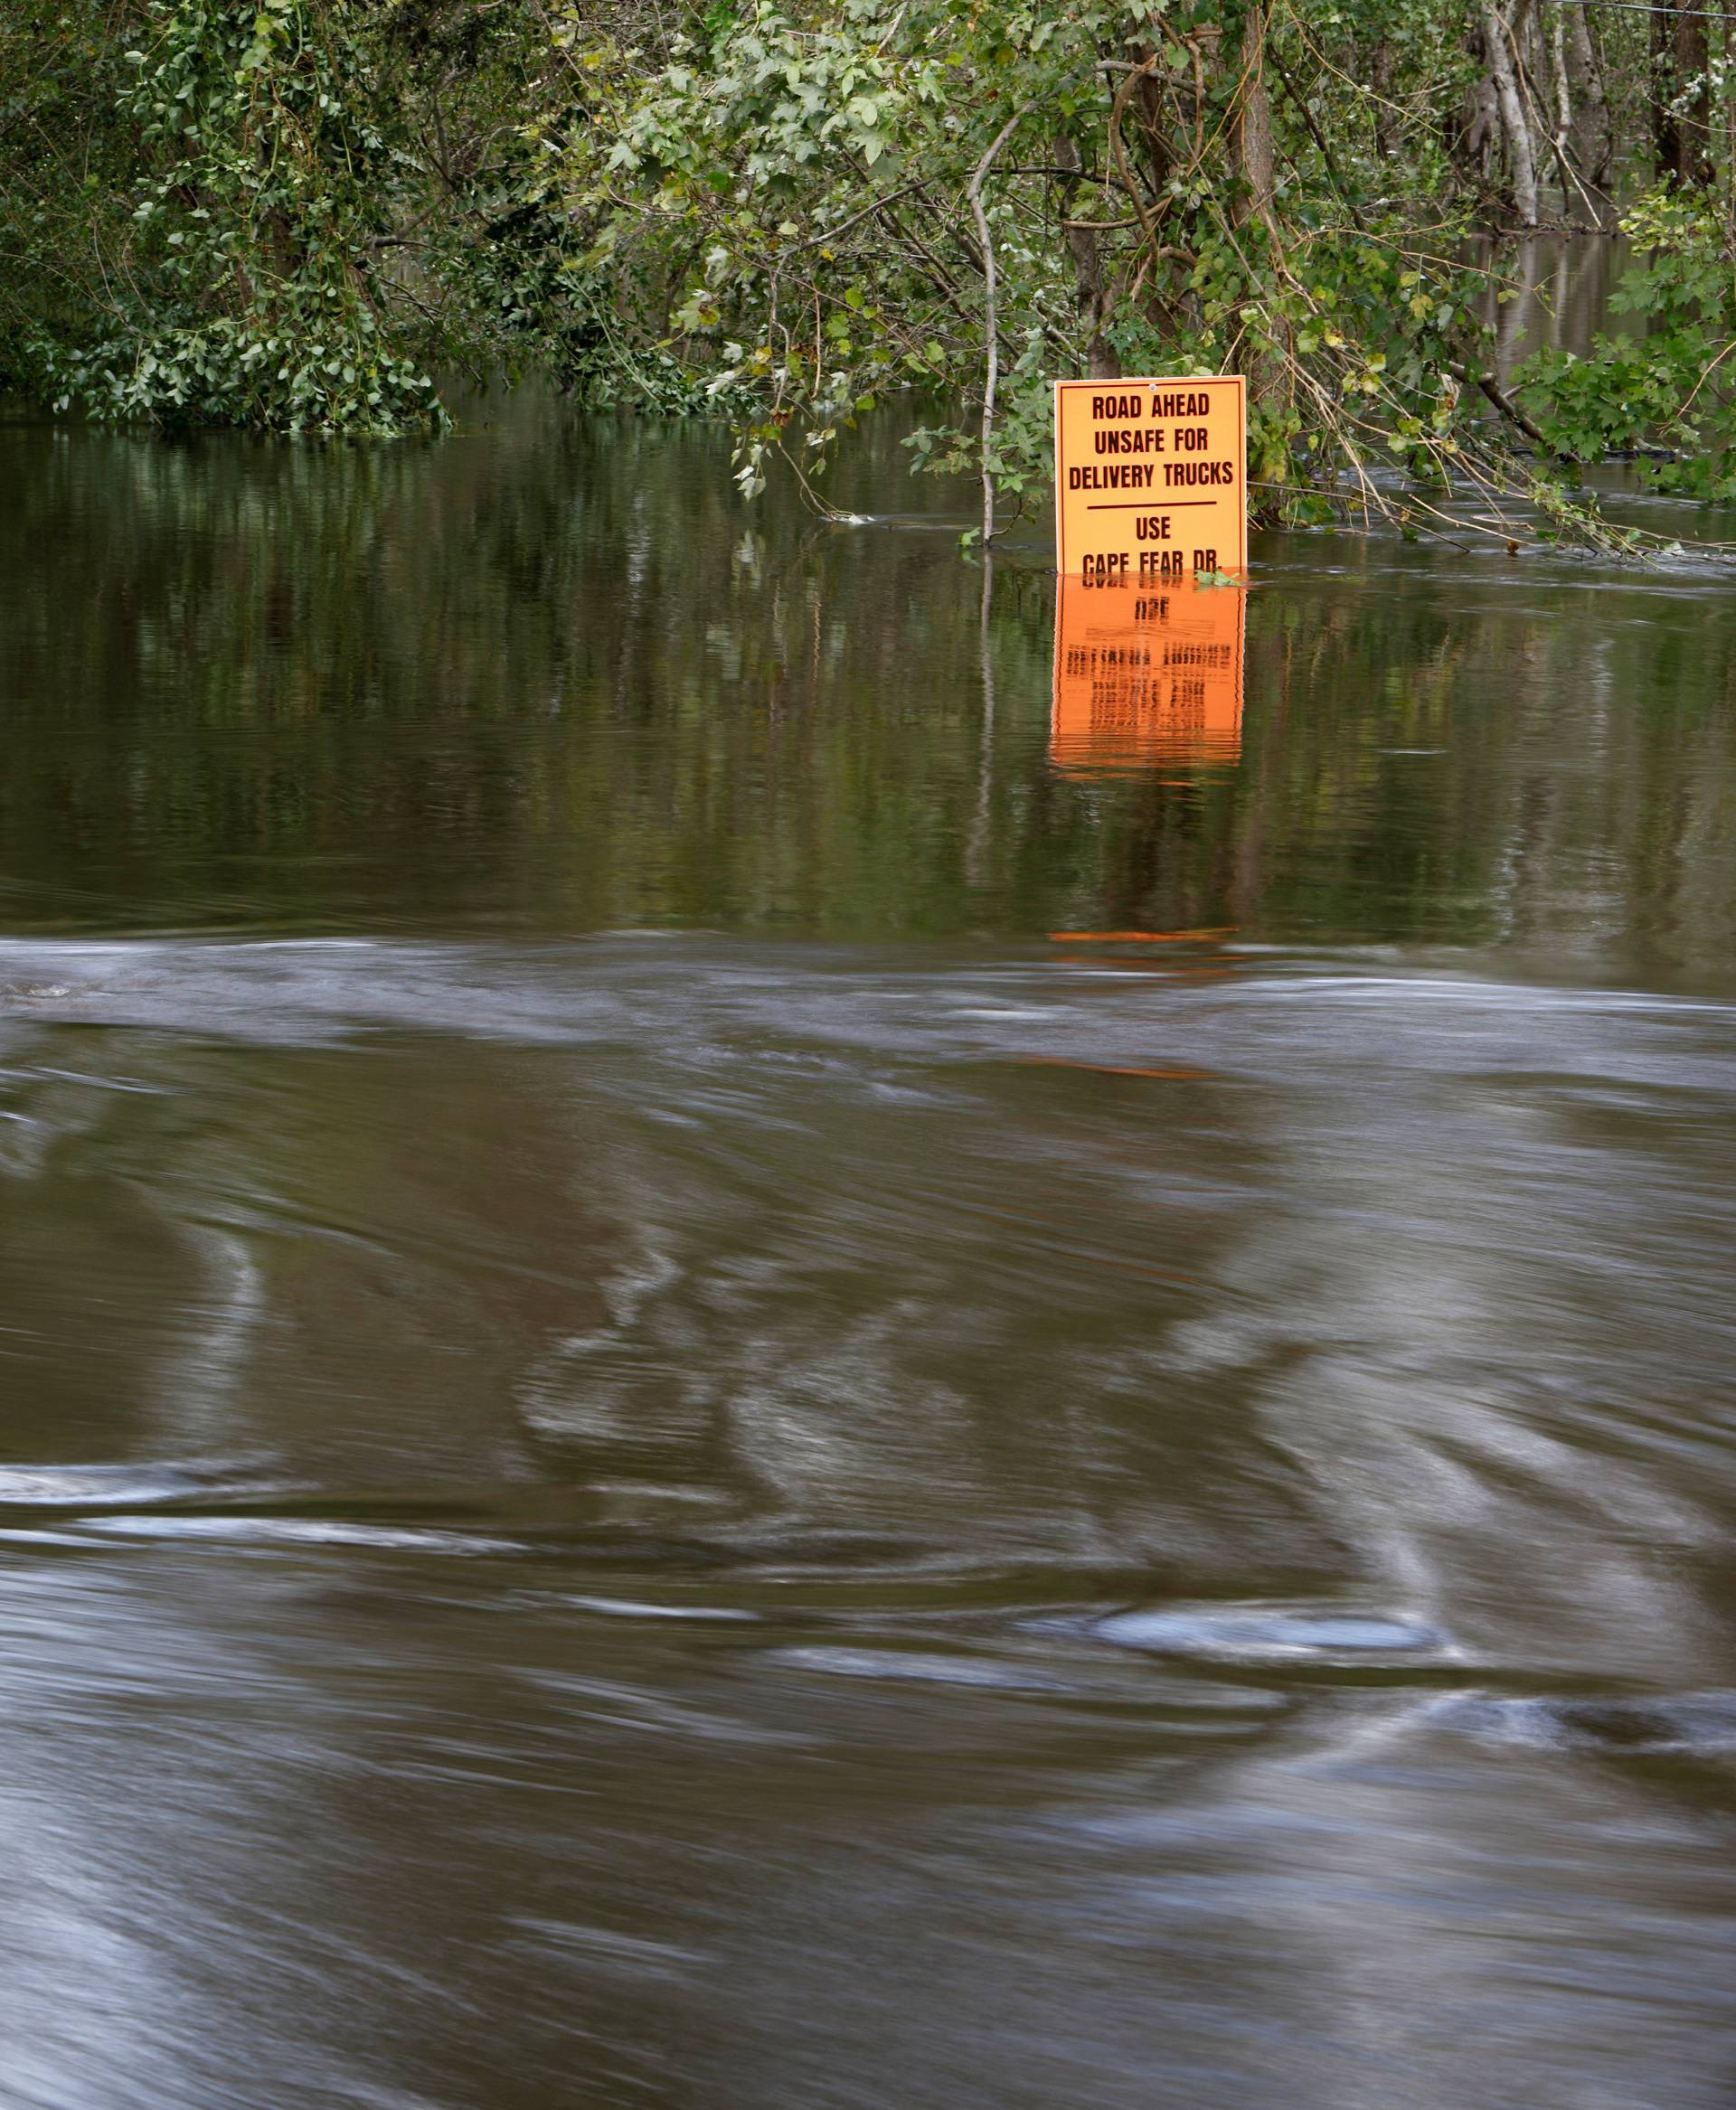 Flood waters flow around submerged street signs as the Northeast Cape Fear River breaks its banks after Hurricane Florence in Burgaw, North Carolina